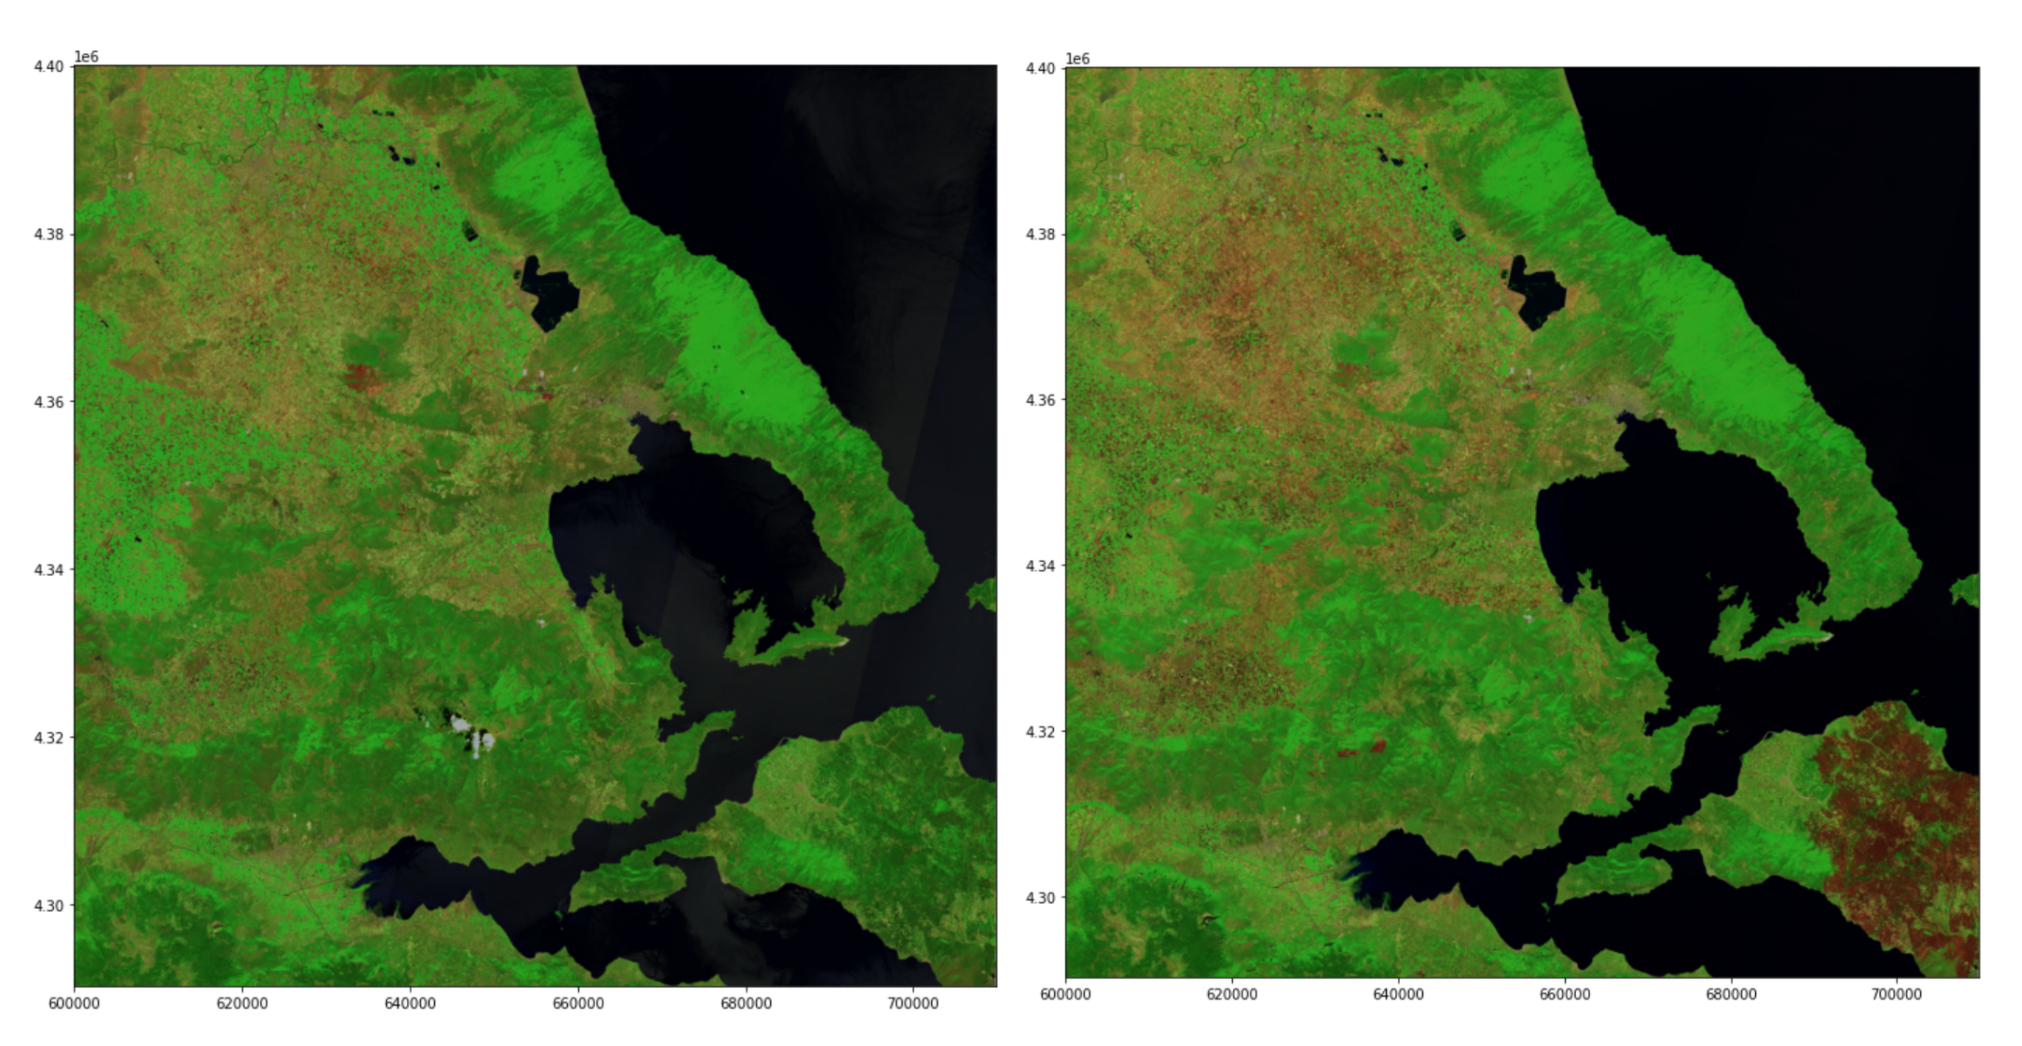 Figure 3. False colour composites from Sentinel-2 Level 2A data showing pre-fire conditions on 1 August 2021 (left) and post-fire conditions on 25 September 2021 (right) in Greece.